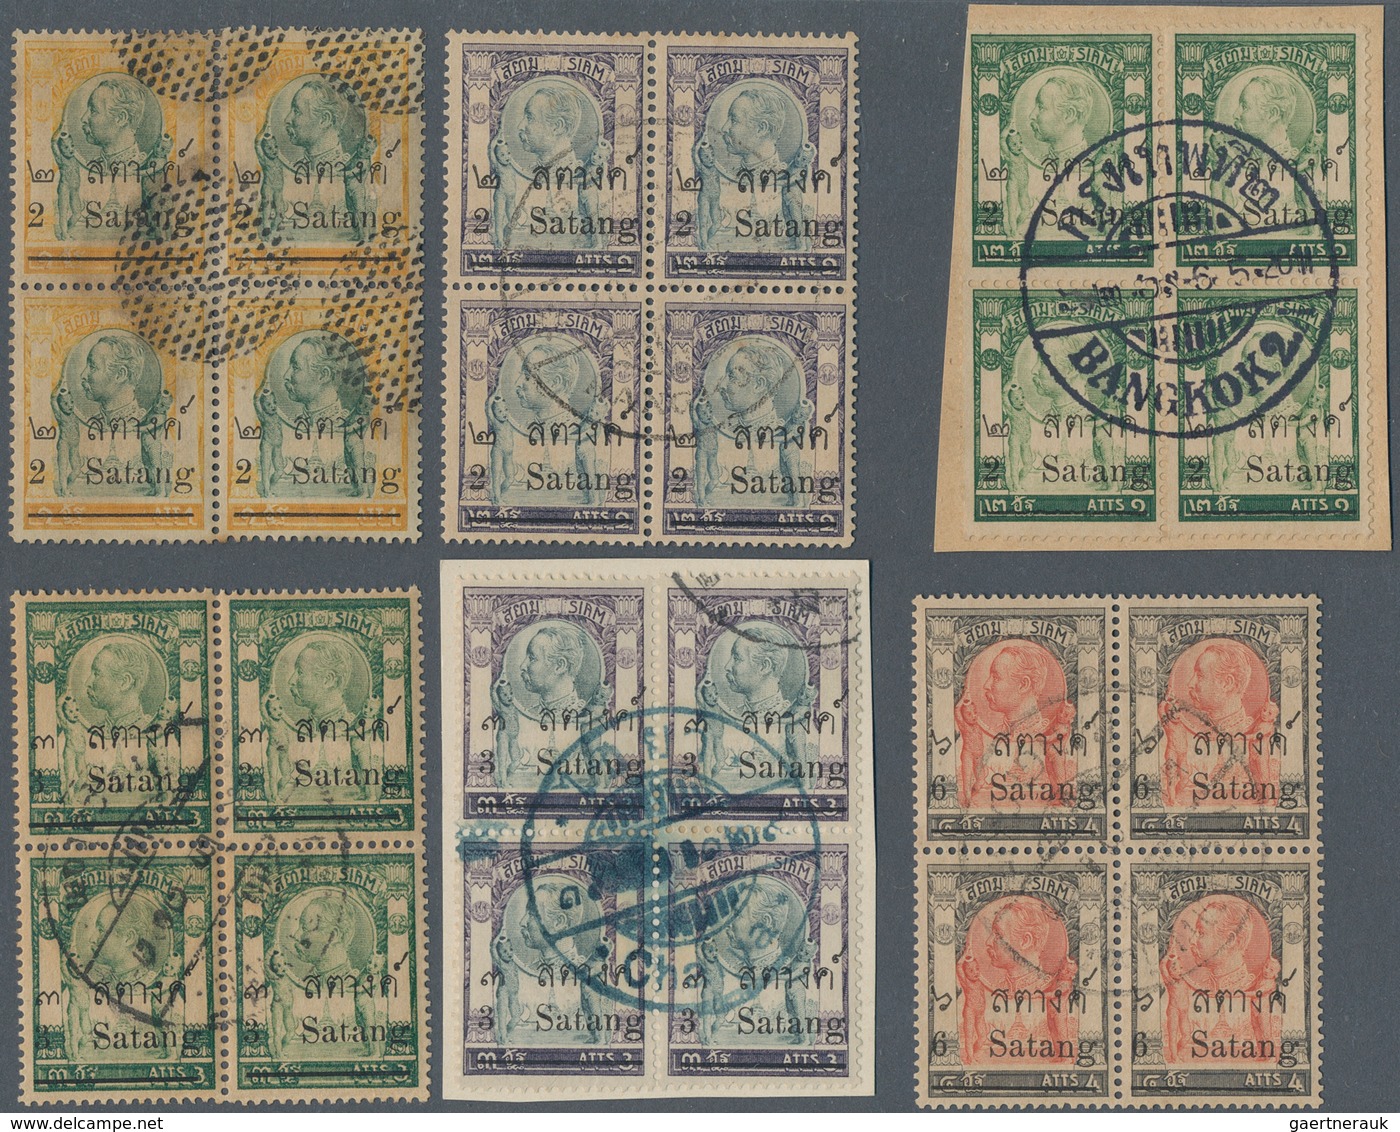 Thailand: 1909 - 1910, Postage Stamps With Two-line Value Imprints 2/1 A, 2/2 A, 2/2 A, 3/3 A, 3/3 A - Thailand